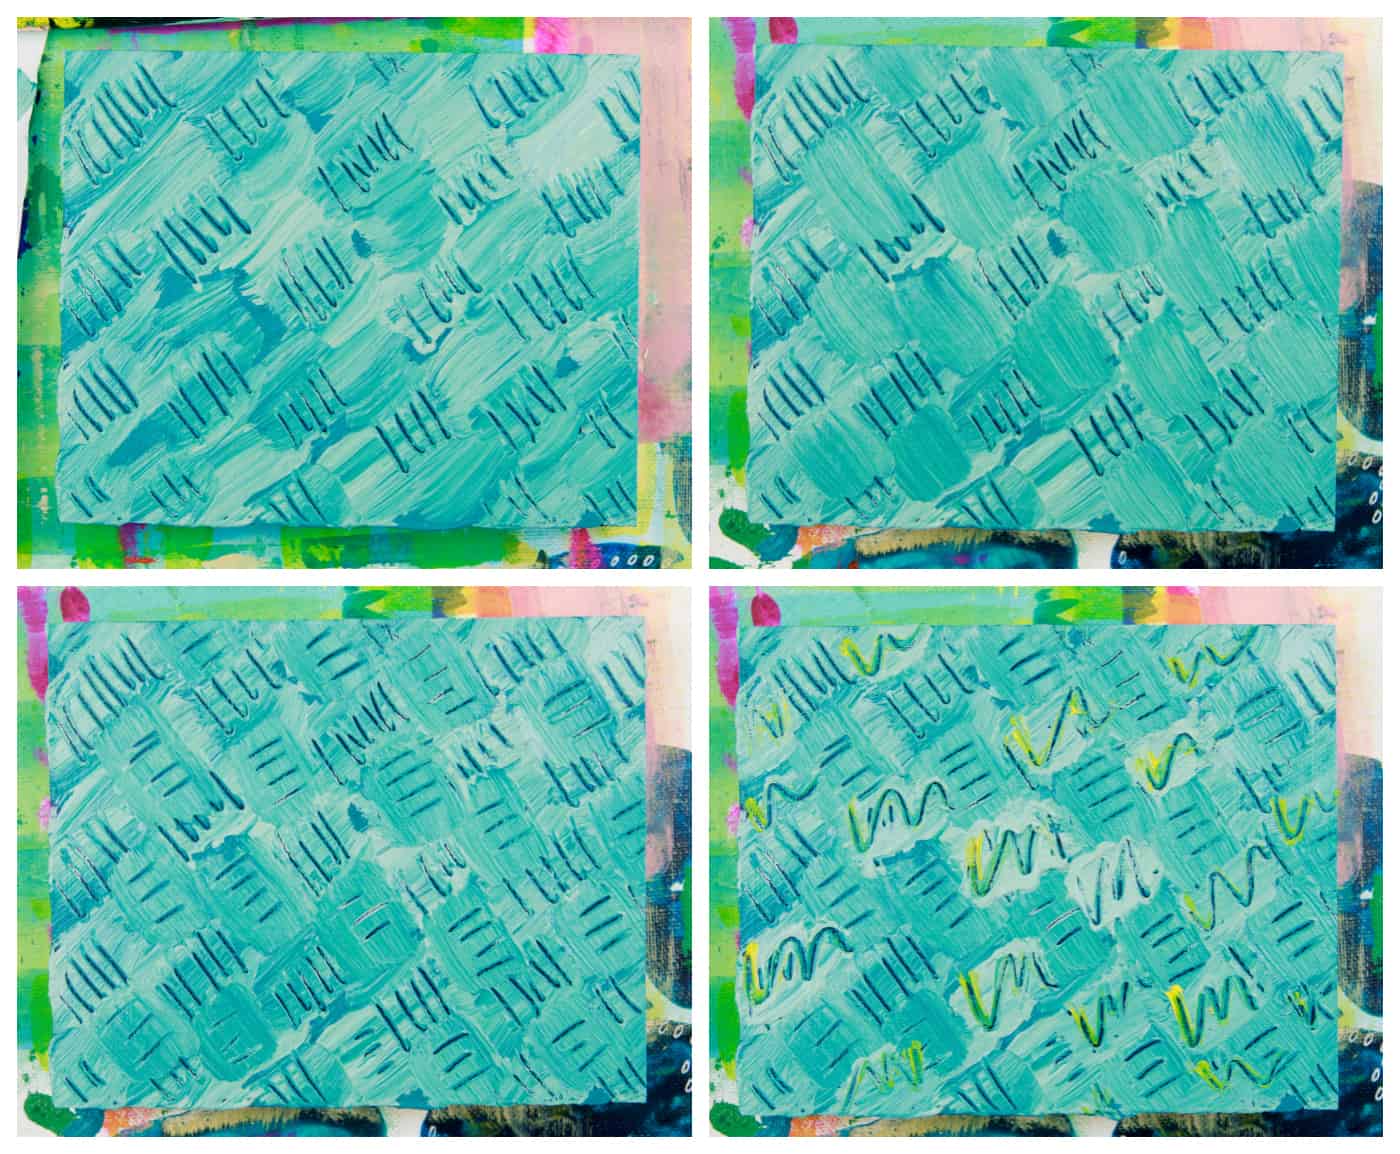 4 images of a turquoise painting with thick paint and scratched-in, or sgraffitoed lines